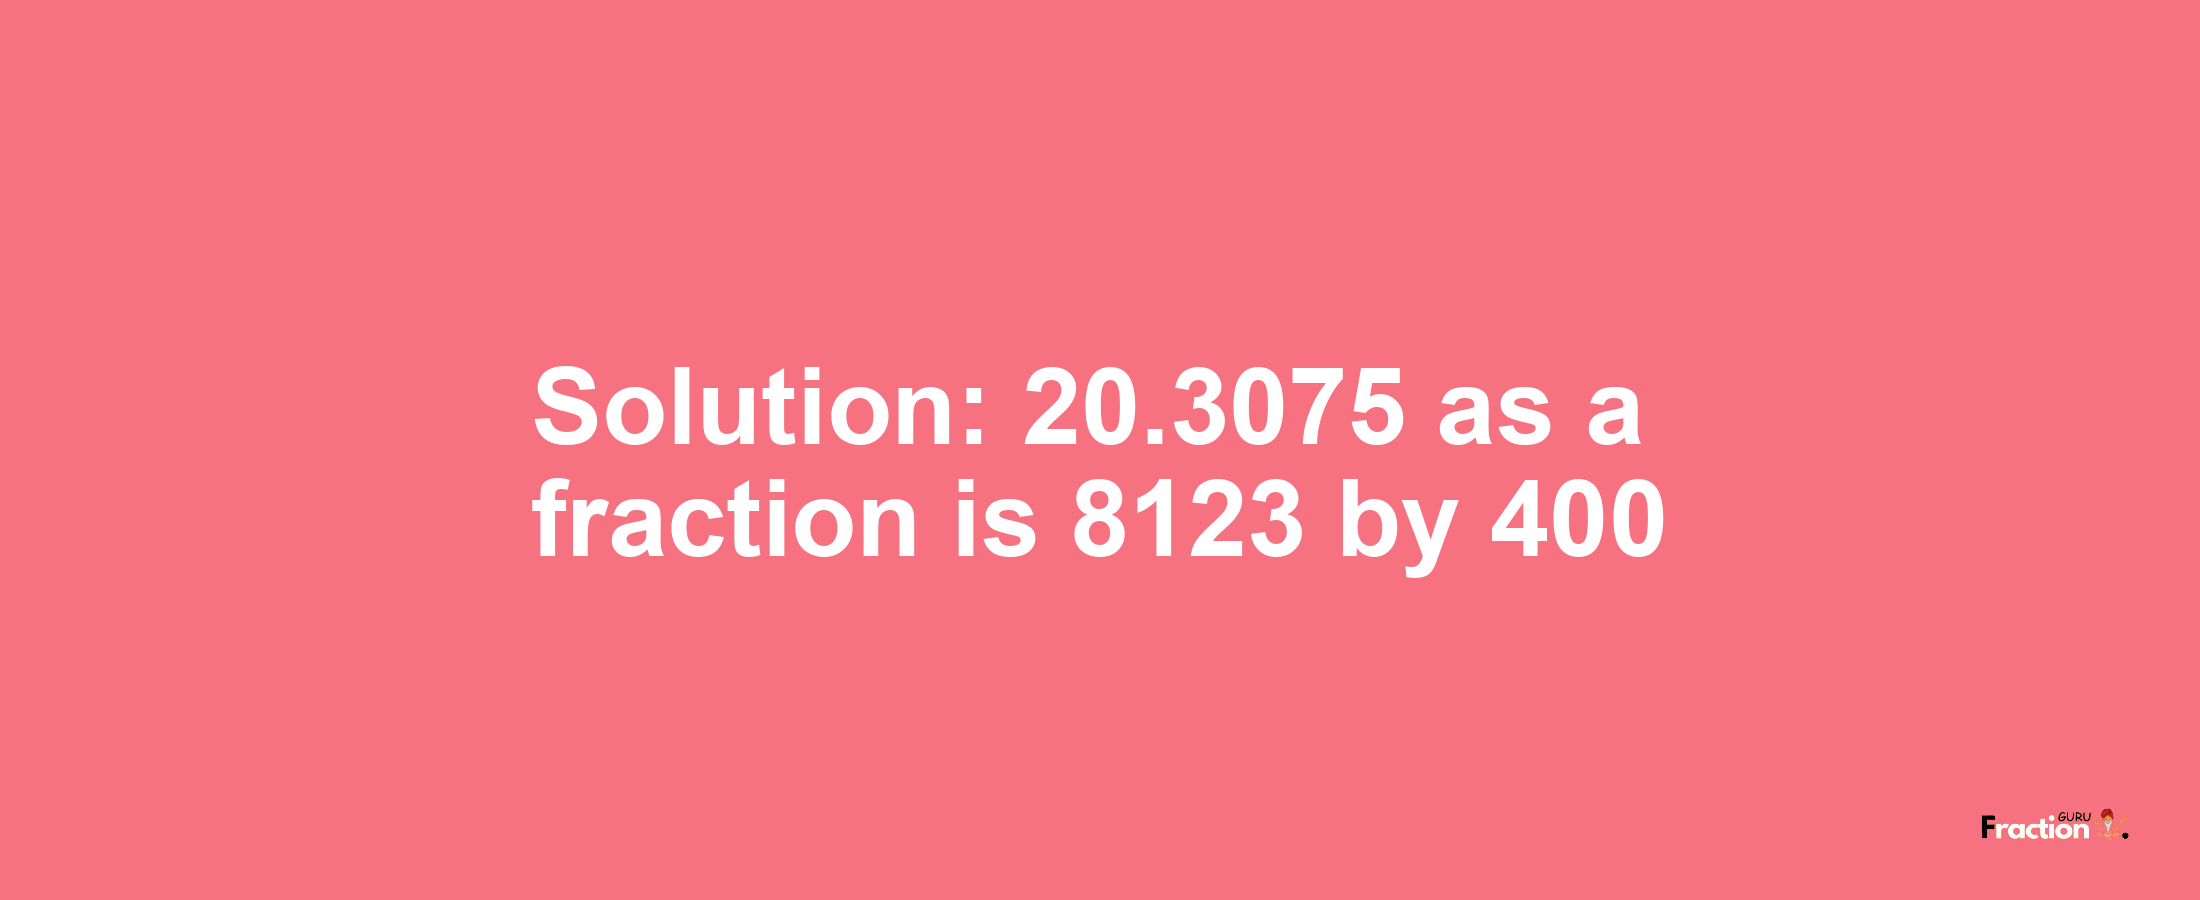 Solution:20.3075 as a fraction is 8123/400